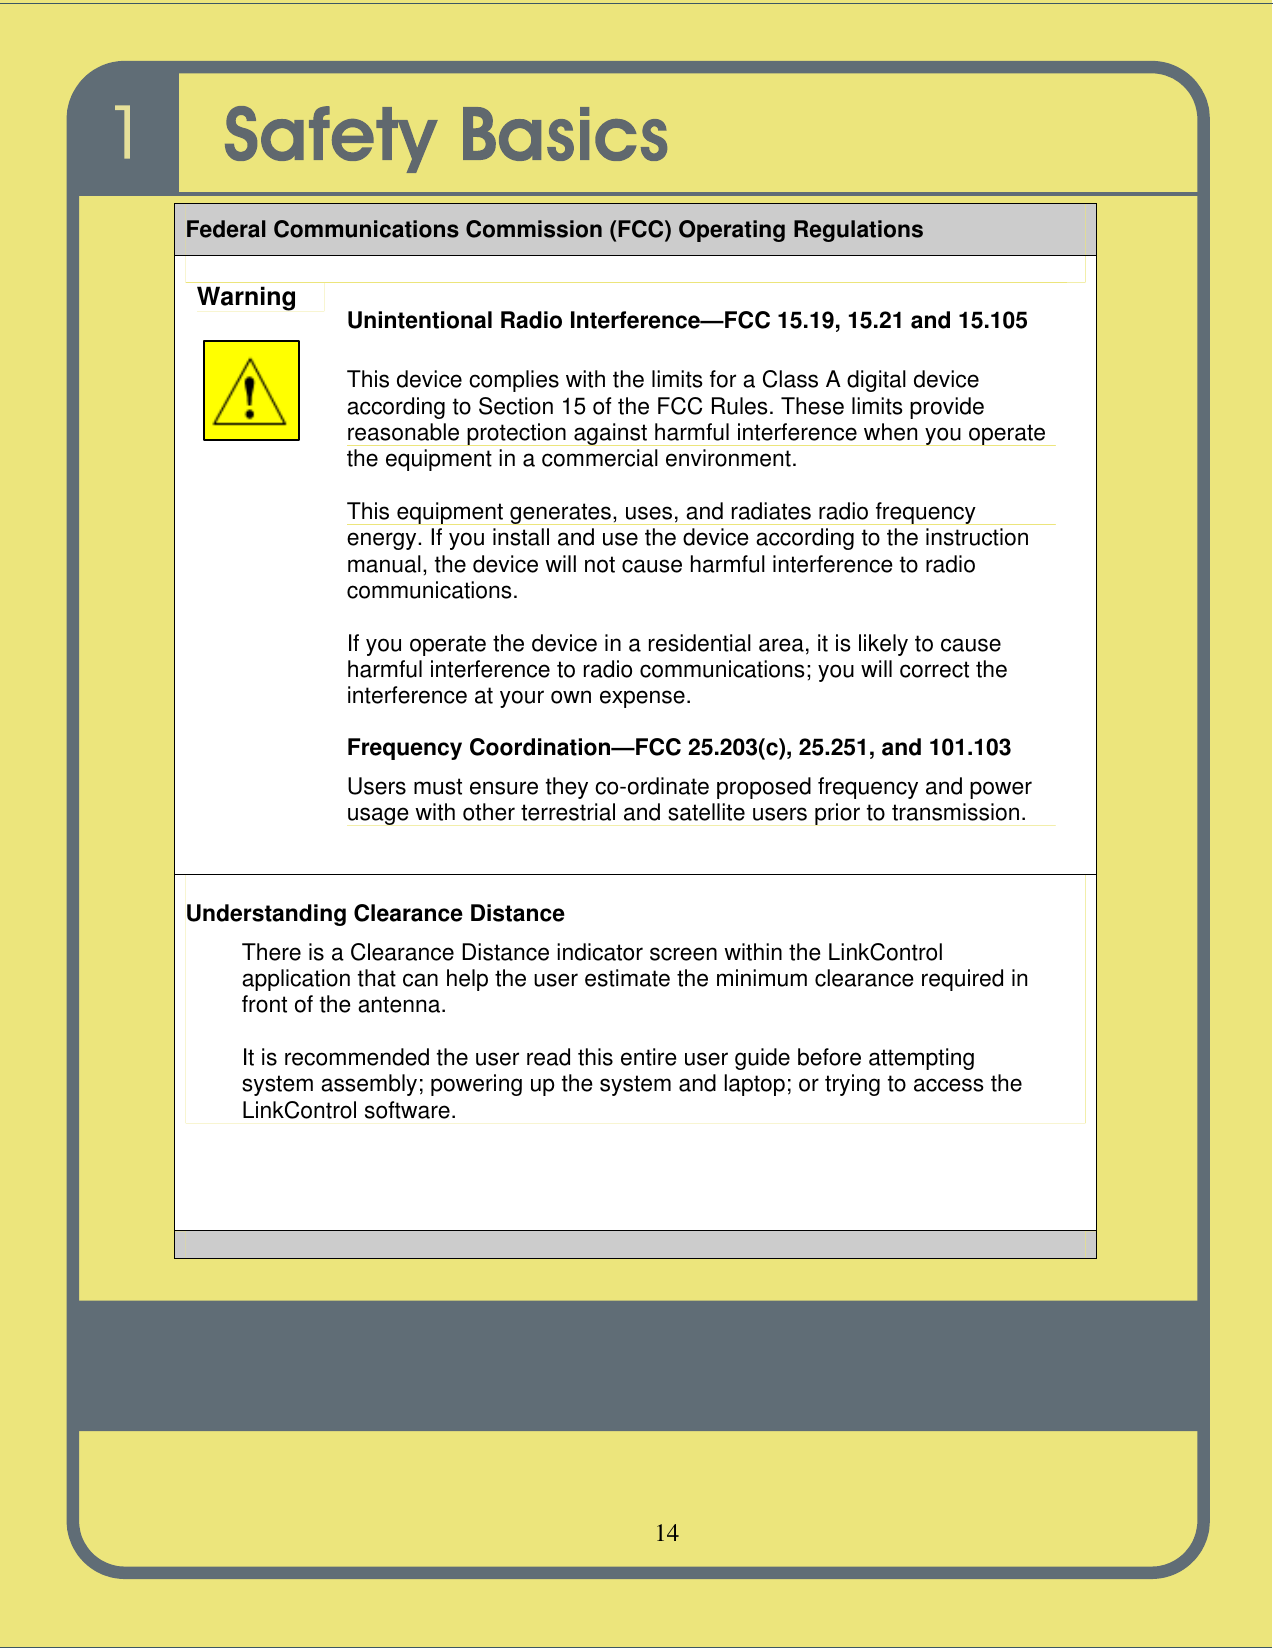   14   Federal Communications Commission (FCC) Operating Regulations  Warning Unintentional Radio Interference—FCC 15.19, 15.21 and 15.105  This device complies with the limits for a Class A digital device according to Section 15 of the FCC Rules. These limits provide reasonable protection against harmful interference when you operate the equipment in a commercial environment.  This equipment generates, uses, and radiates radio frequency energy. If you install and use the device according to the instruction manual, the device will not cause harmful interference to radio communications.  If you operate the device in a residential area, it is likely to cause harmful interference to radio communications; you will correct the interference at your own expense. Frequency Coordination—FCC 25.203(c), 25.251, and 101.103 Users must ensure they co-ordinate proposed frequency and power usage with other terrestrial and satellite users prior to transmission. Understanding Clearance Distance There is a Clearance Distance indicator screen within the LinkControl application that can help the user estimate the minimum clearance required in front of the antenna.  It is recommended the user read this entire user guide before attempting system assembly; powering up the system and laptop; or trying to access the LinkControl software.   